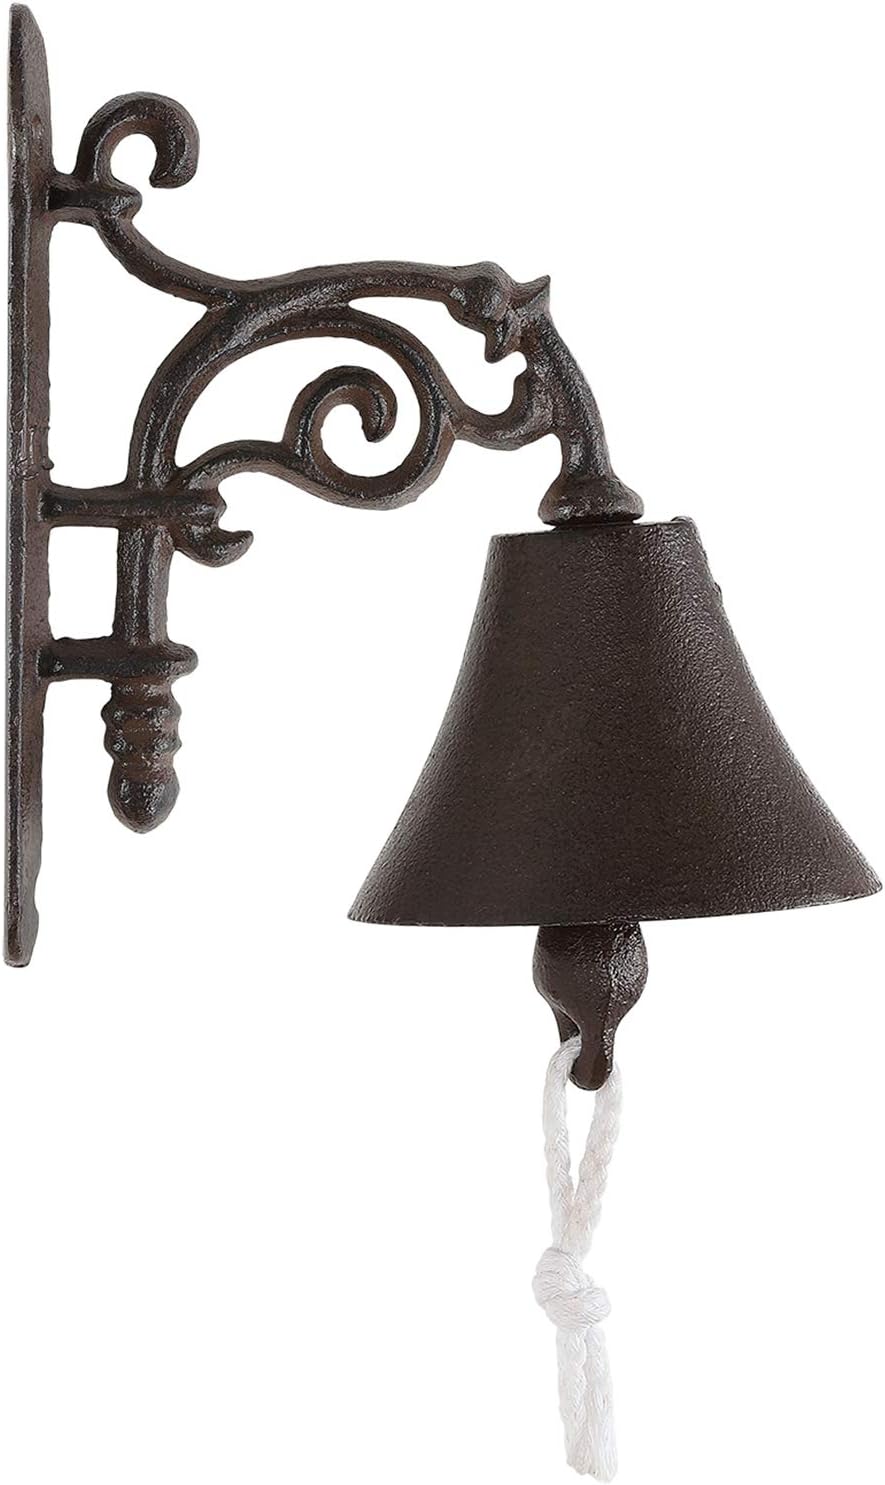 Cast iron dinner bell with ornate sconce